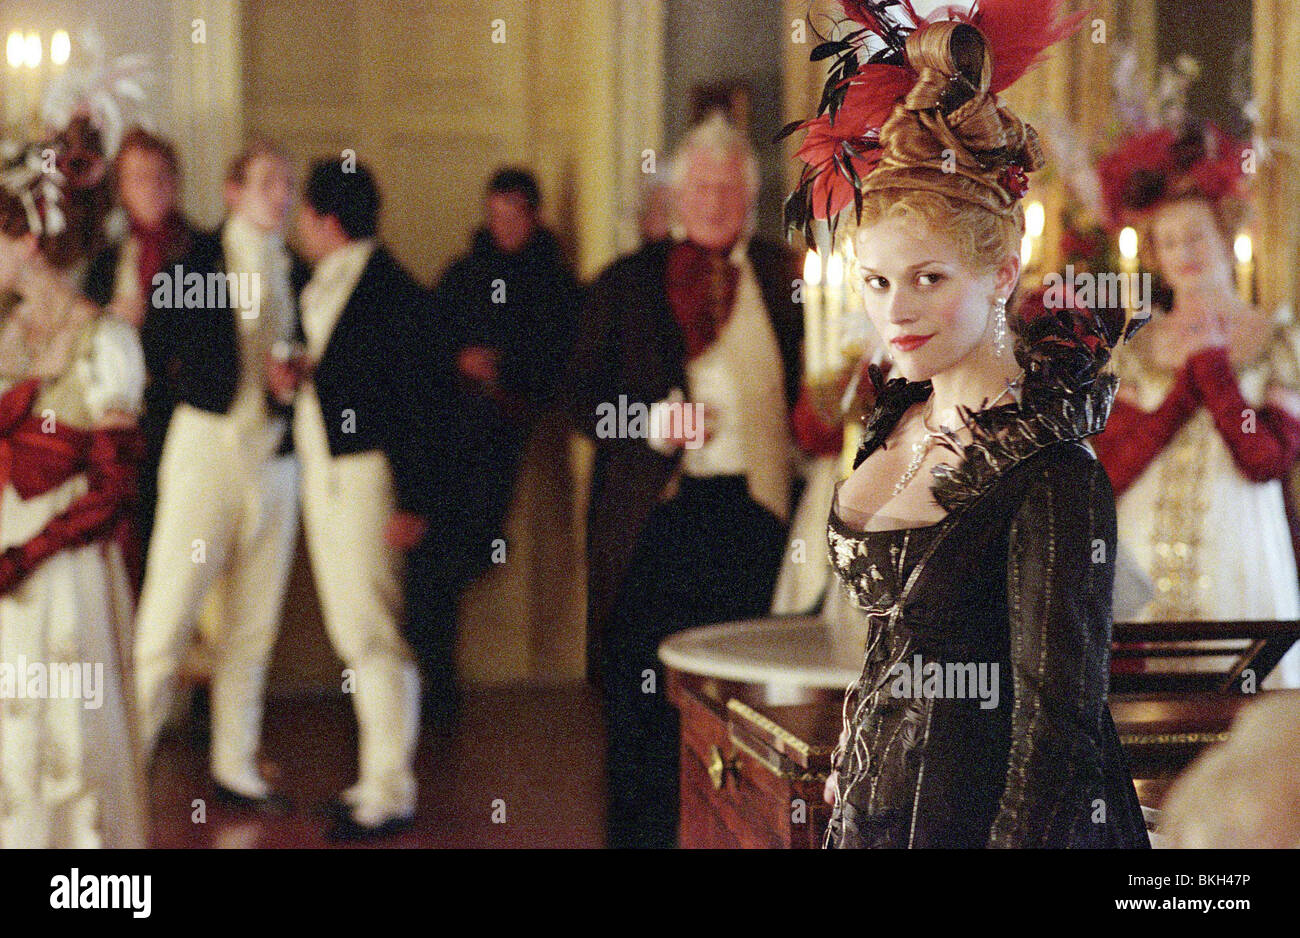 VANITY FAIR (2004) Reese Witherspoon VANF 001-015 Banque D'Images